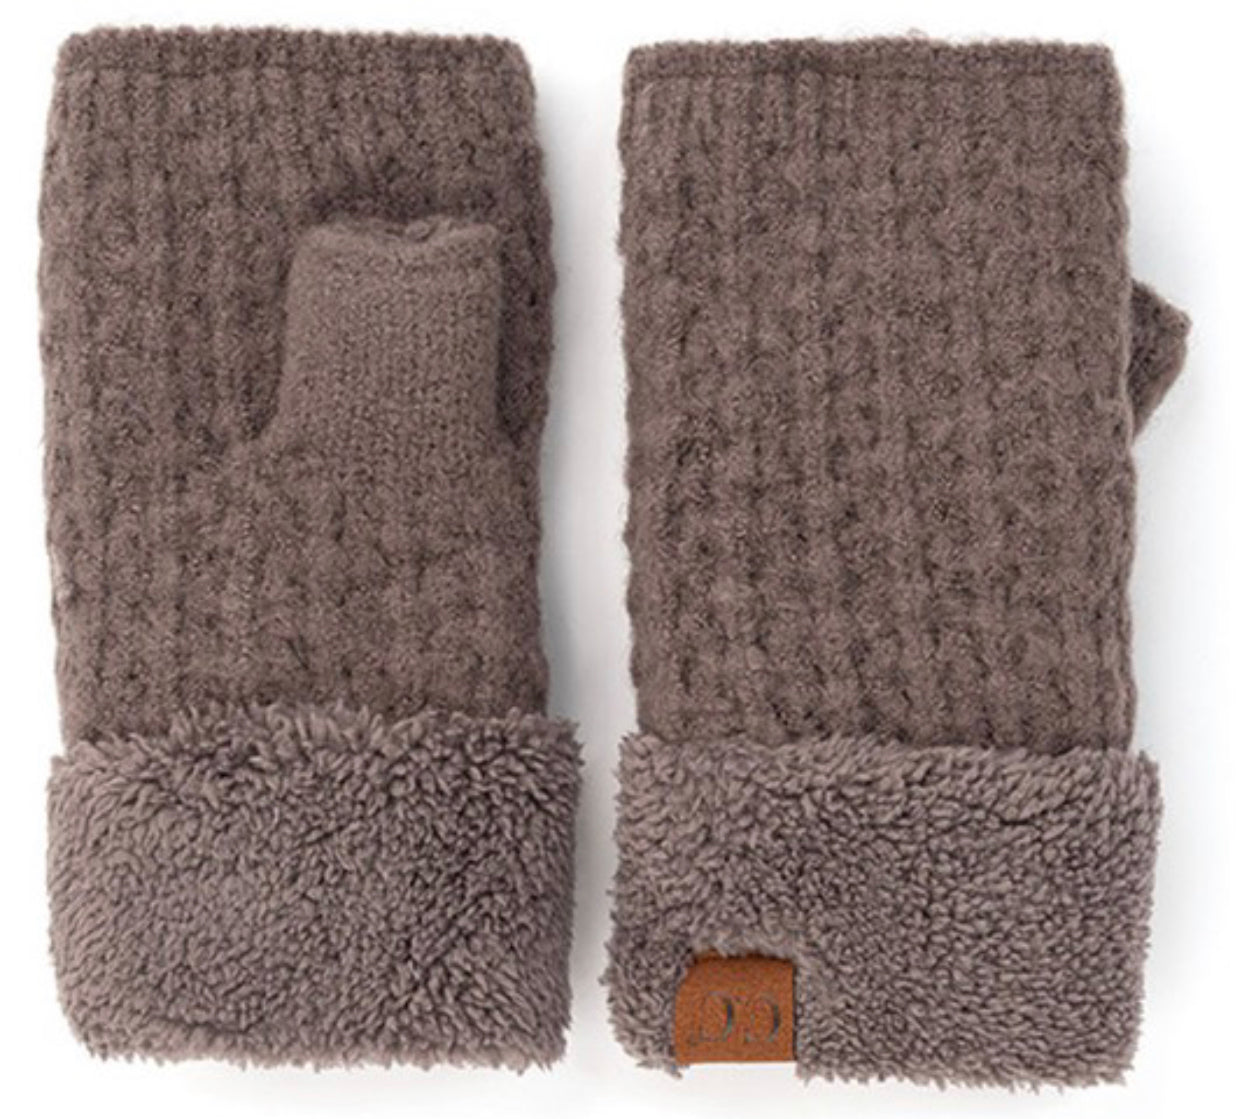 HOT ITEM! CC fingerless gloves with soft, warm lining (many colors available) - Cocoa - Lisa’s Boutique